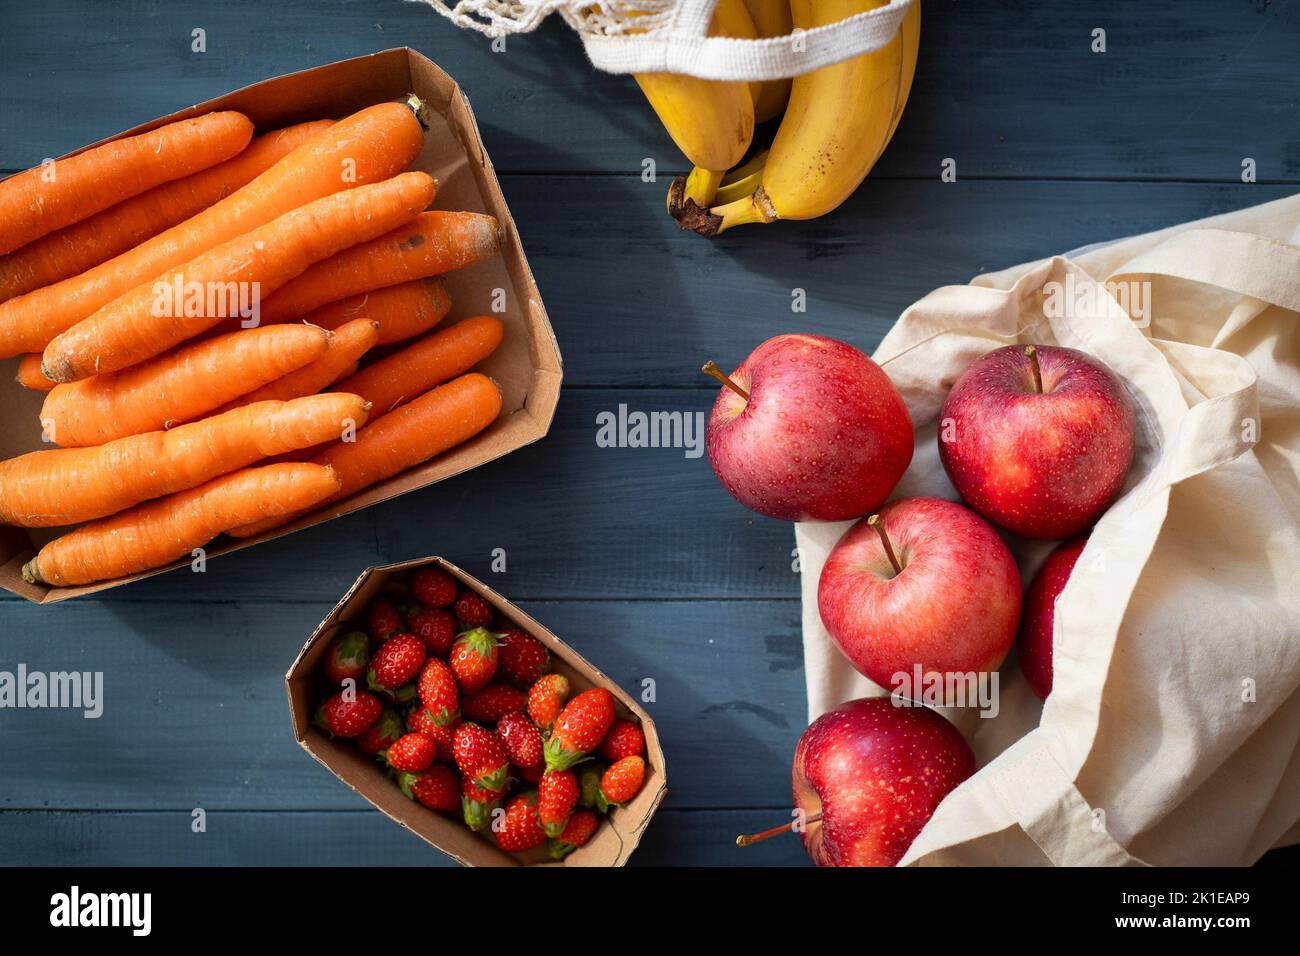 Assorted vegetables and fruits in paper, wood and fabric reusable packages placed on blue wooden table. Eco-friendly packaging concept. Top view. Stock Photo